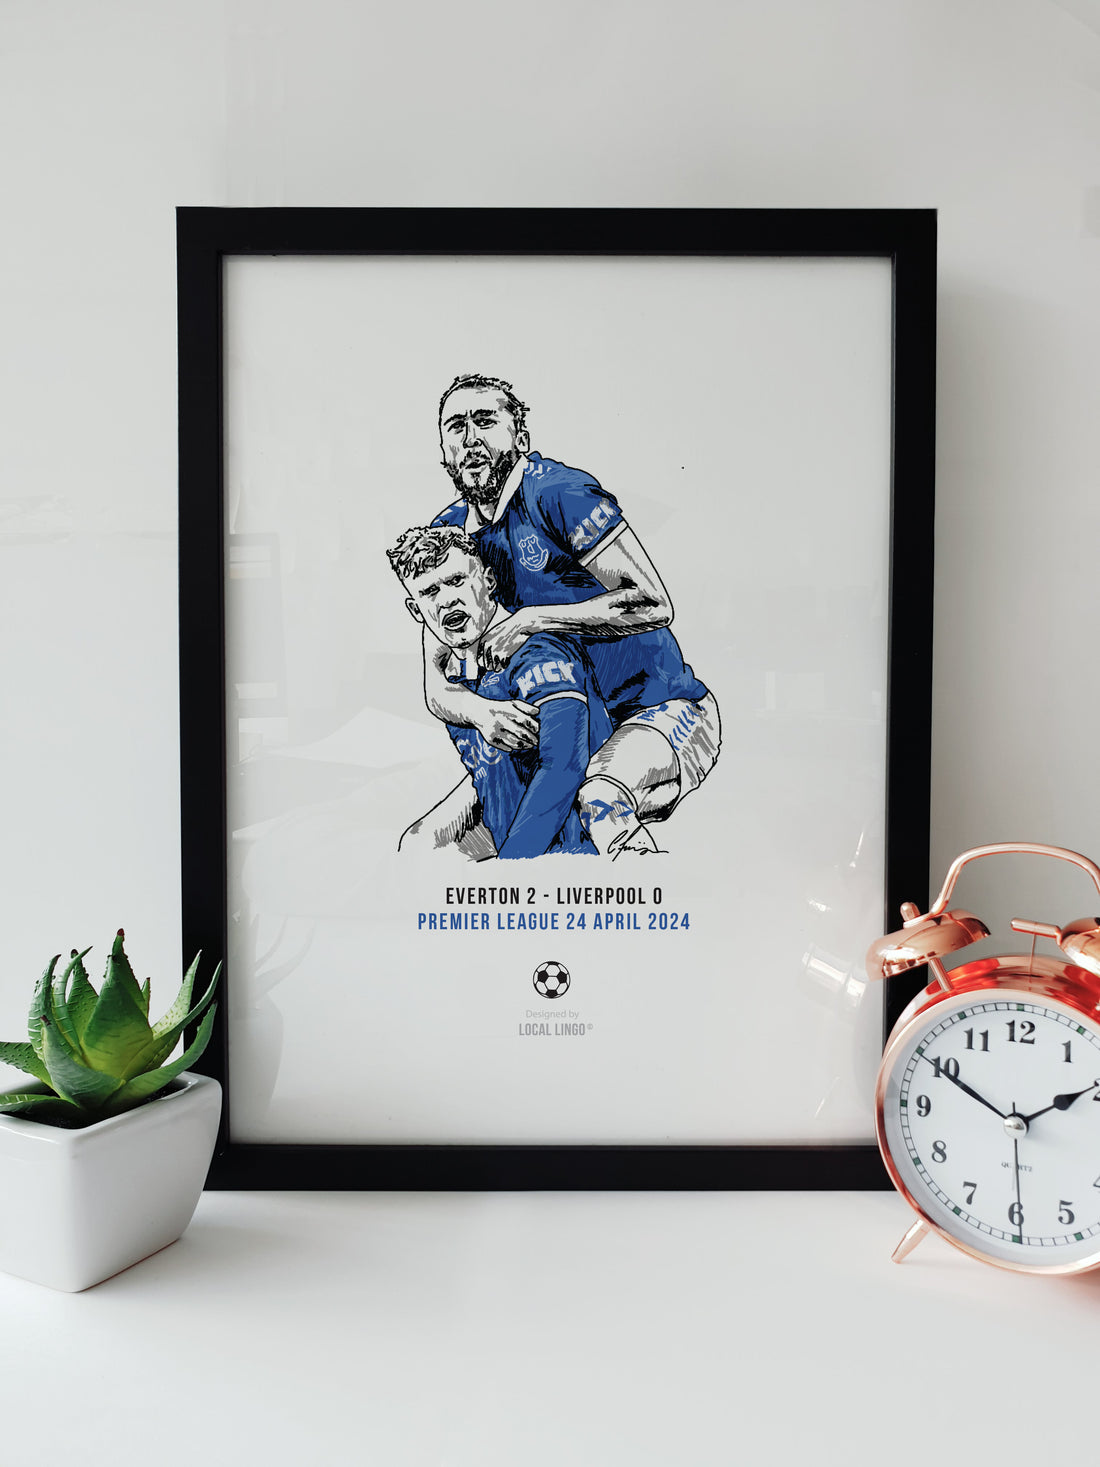 Everton's Derby Win Art Print, featuring Branthwaite and Calvert-Lewin celebrating a goal against Liverpool, available in A4 and A3 sizes, designed by Local Lingo.